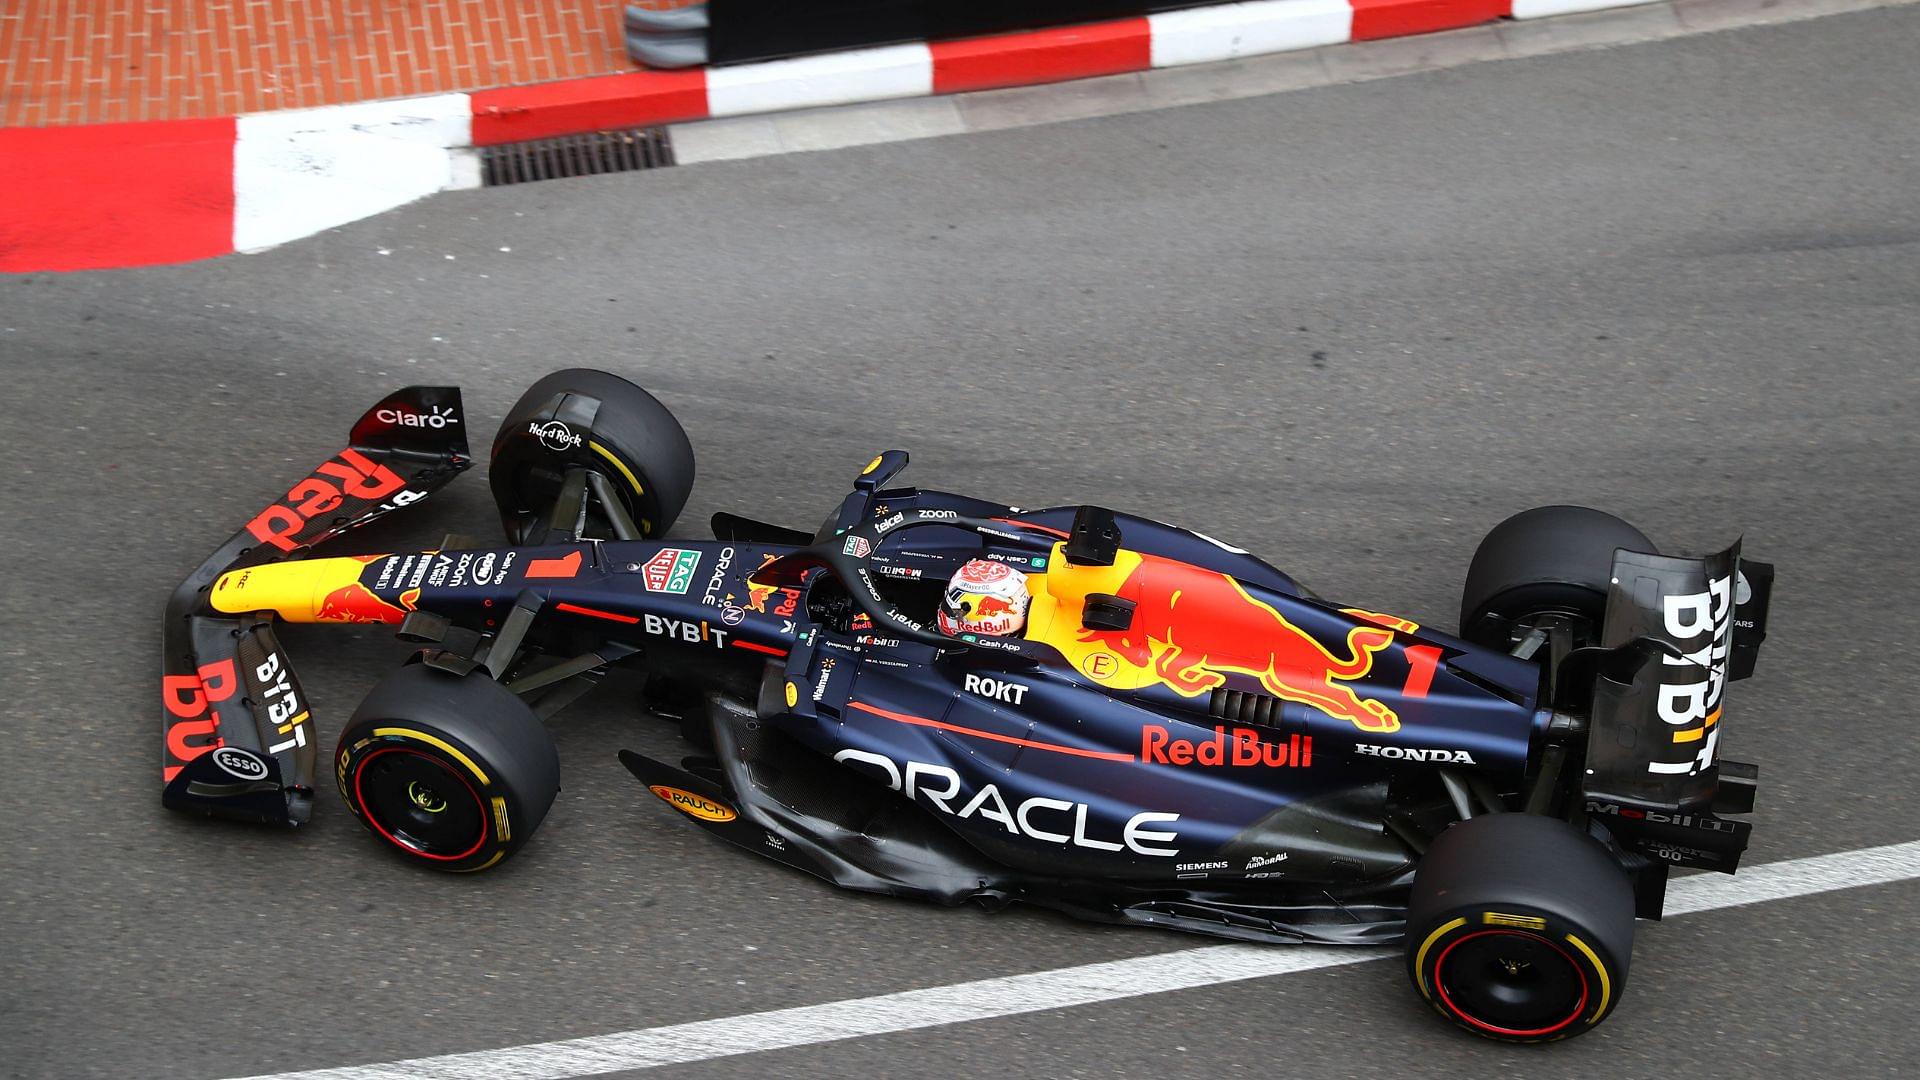 Red Bull Has Their Eye Out For One Team at Monaco: "Looked Quick"